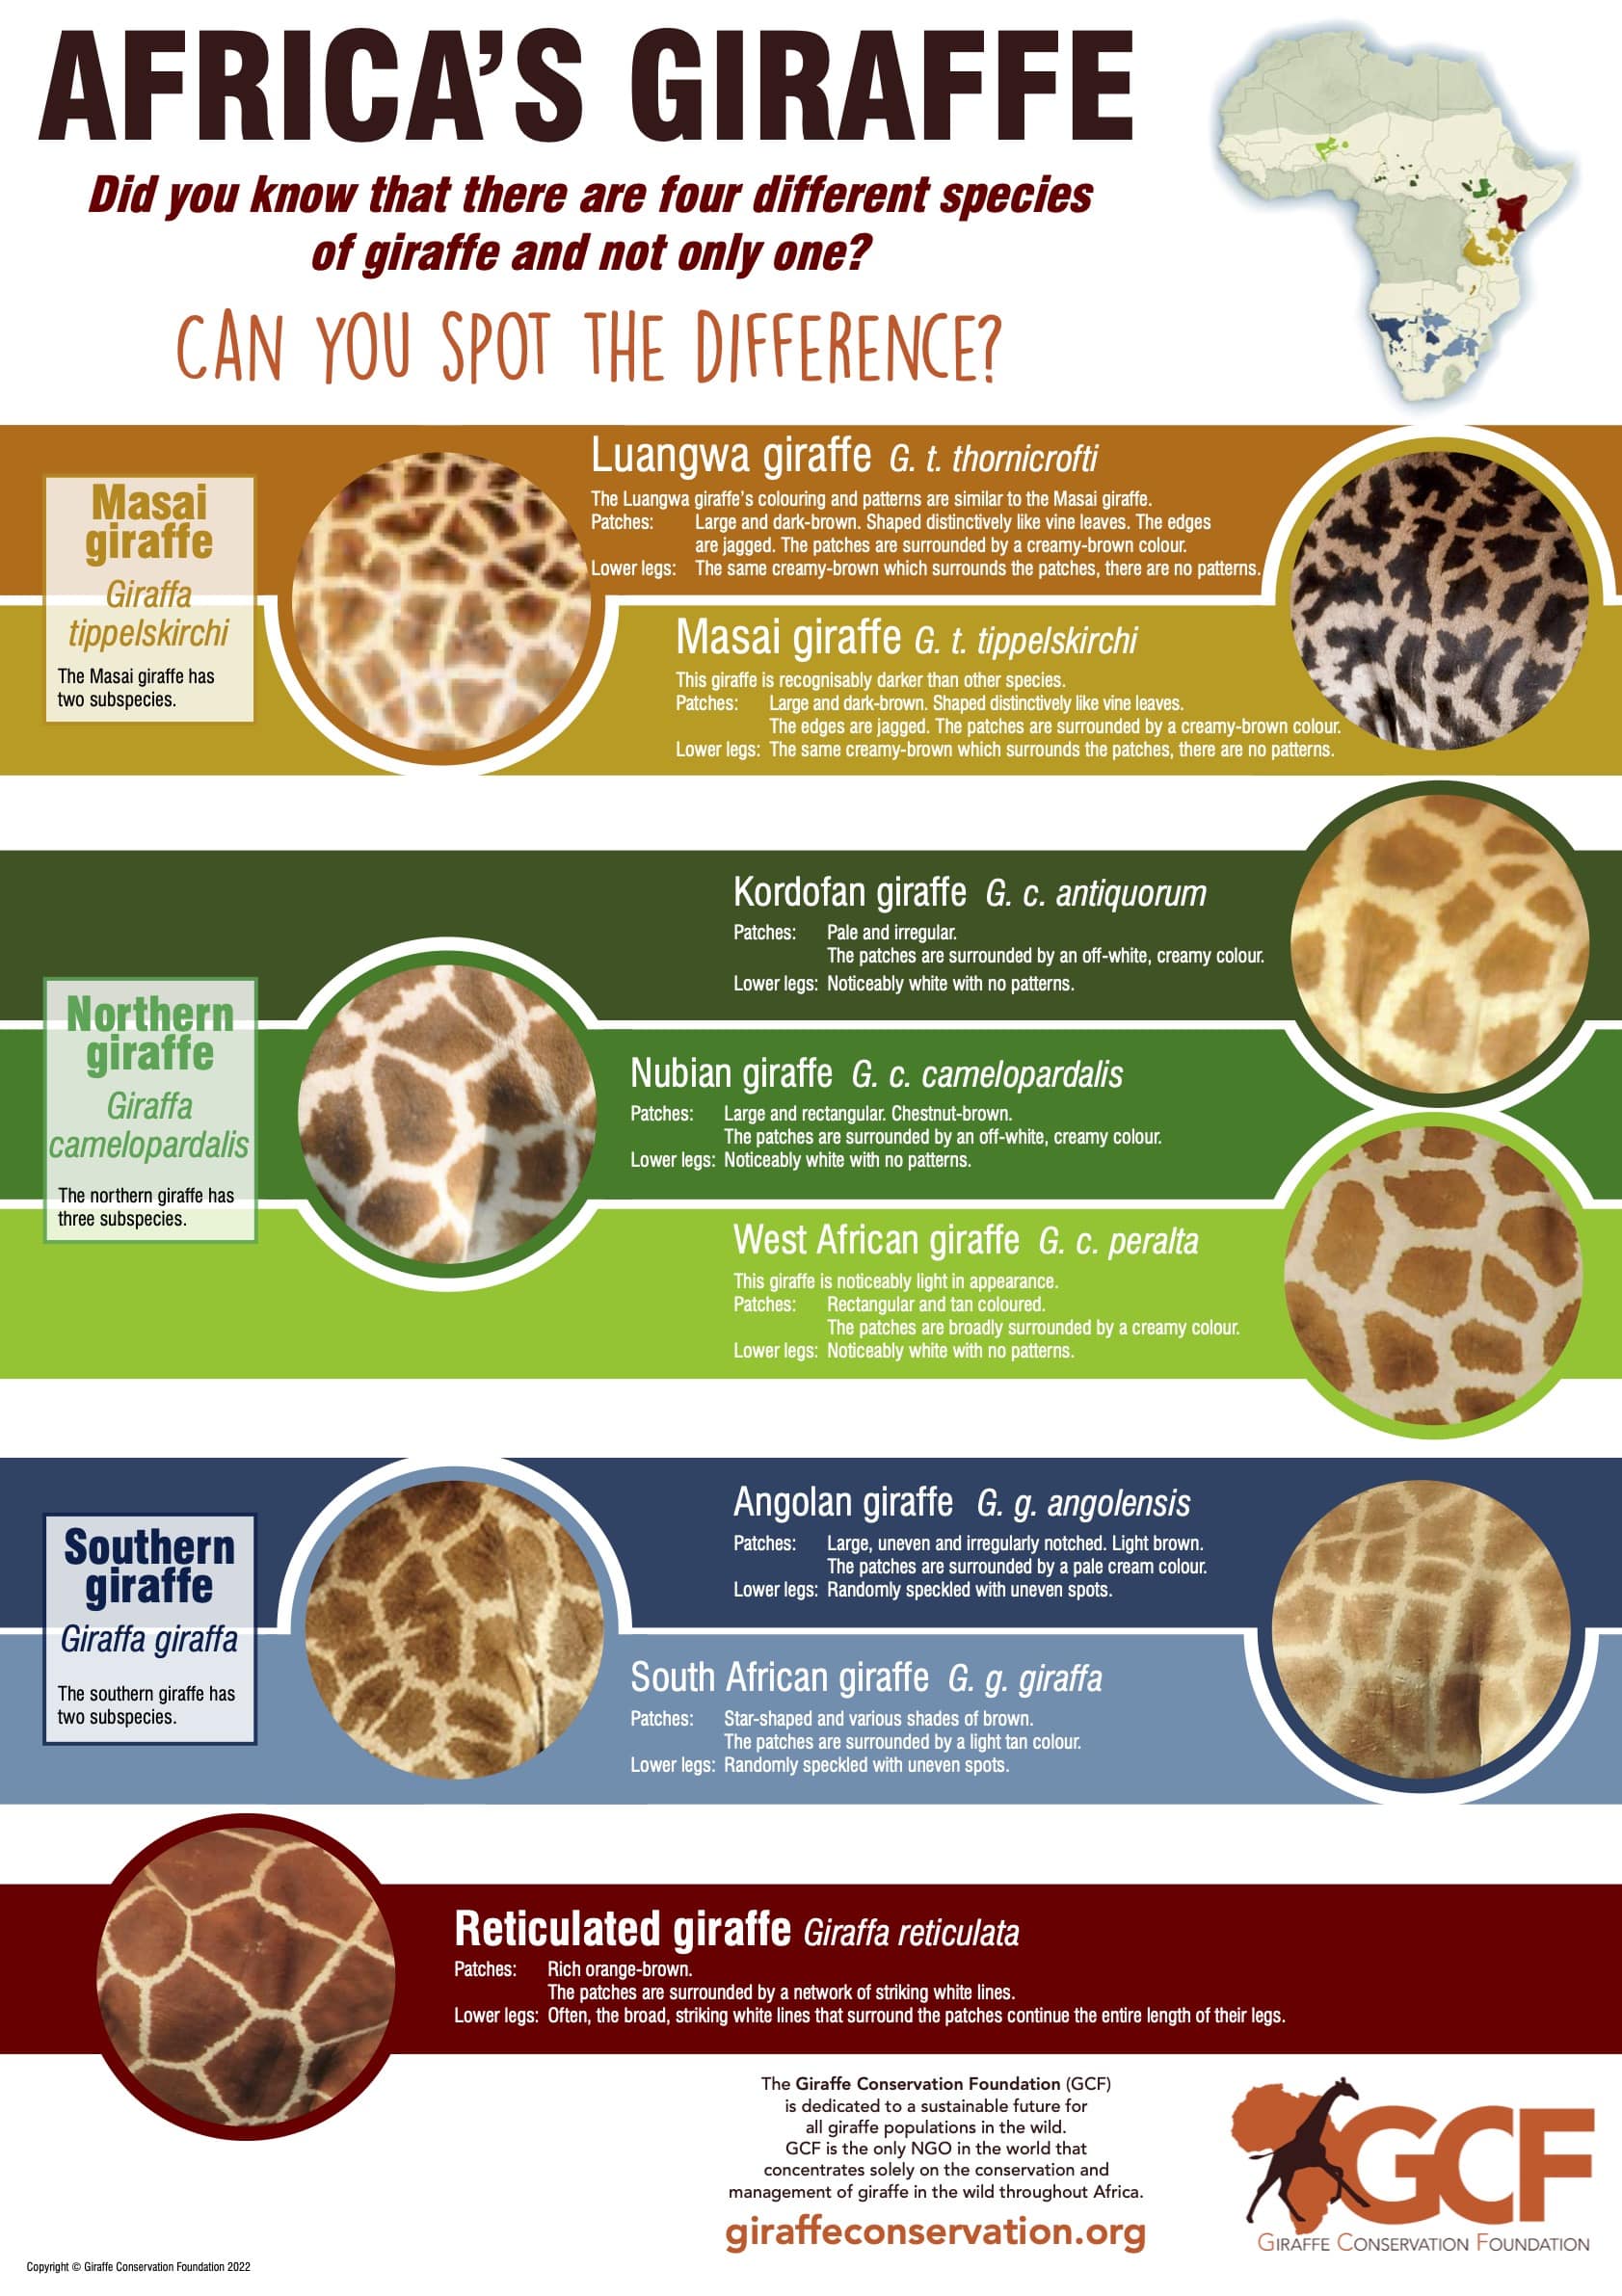 Poster: Giraffe coat patterns – Can you spot the difference?